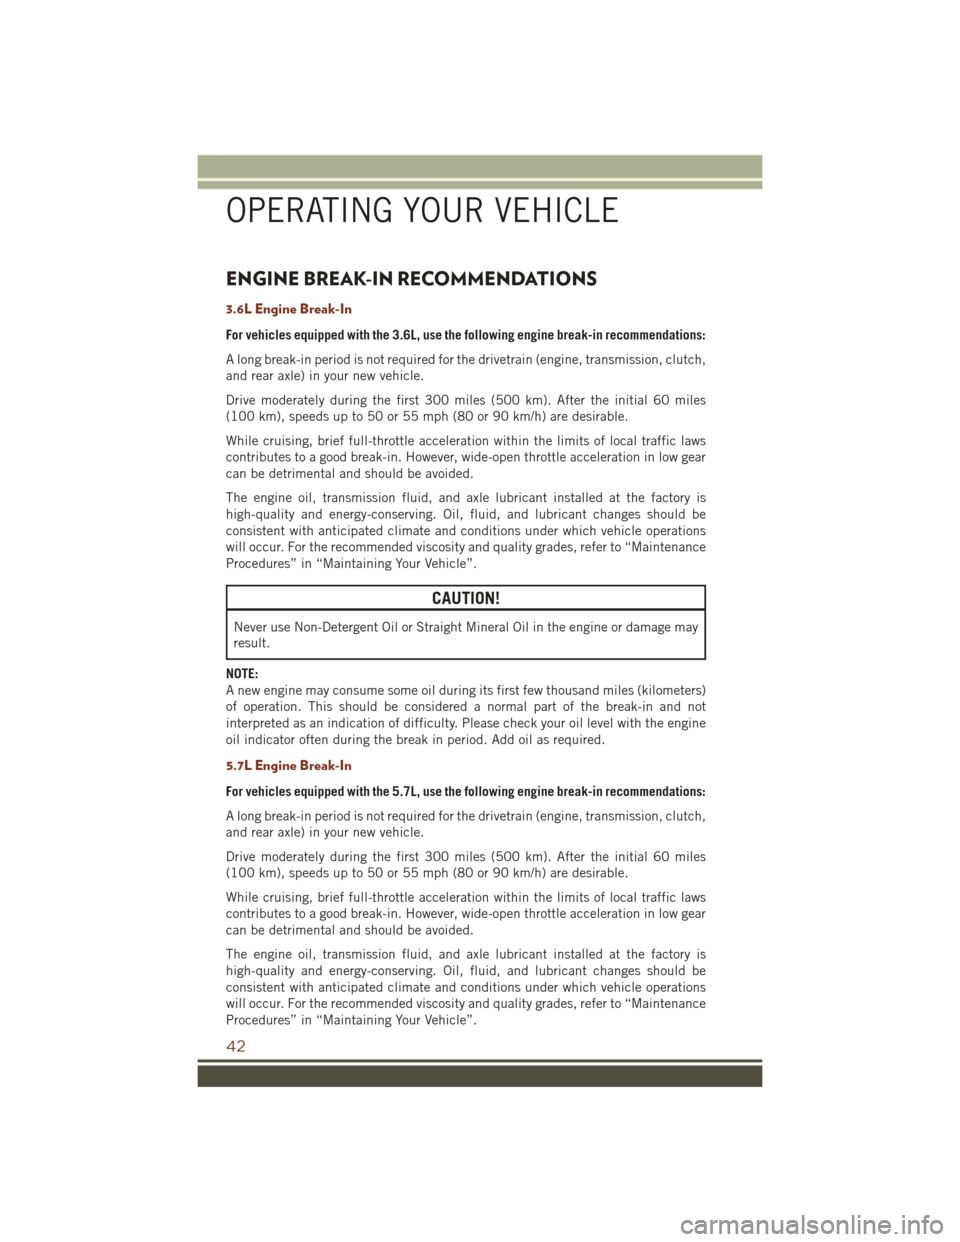 JEEP GRAND CHEROKEE 2016 WK2 / 4.G User Guide ENGINE BREAK-IN RECOMMENDATIONS
3.6L Engine Break-In
For vehicles equipped with the 3.6L, use the following engine break-in recommendations:
A long break-in period is not required for the drivetrain (